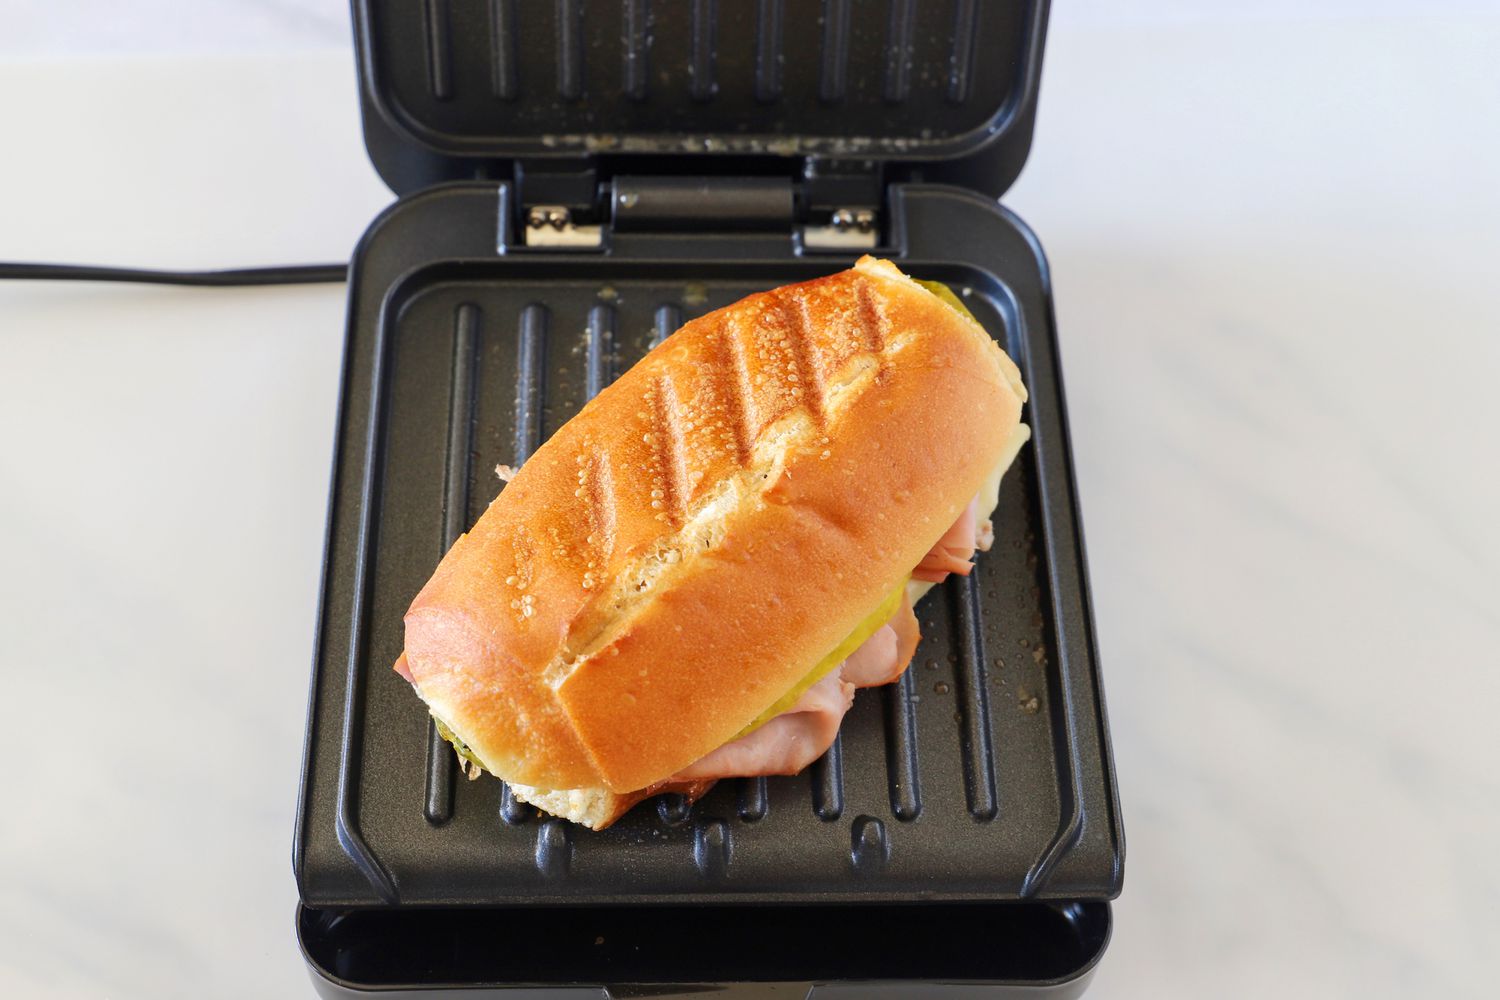 a small panini press with a sandwich on its grates and its lid open